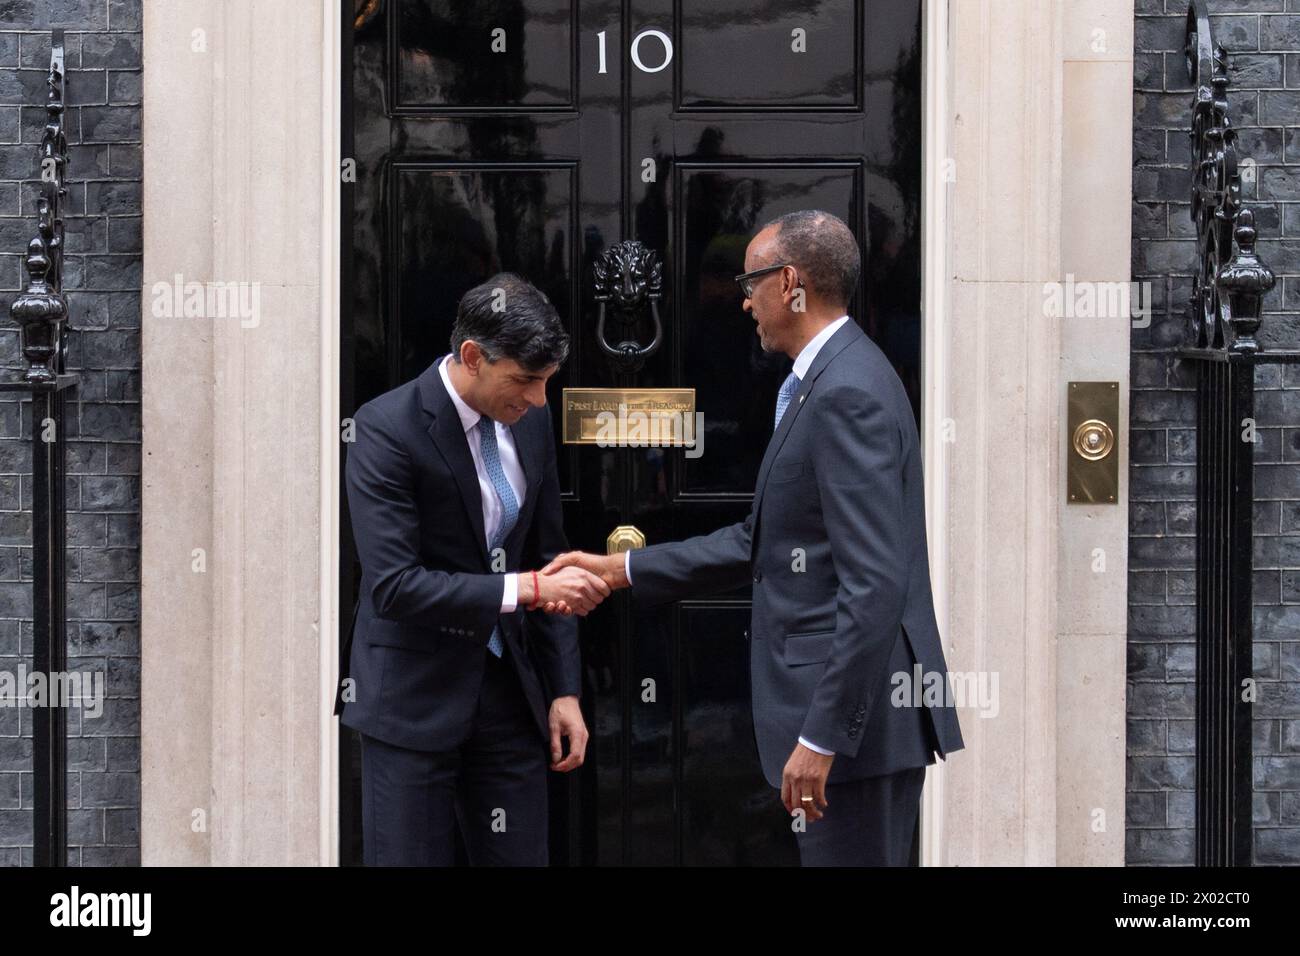 London, UK. 09 Apr 2024. President Of Rwanda Paul Kagame arrives for a meeting with British Prime Minister Rishi Sunak in Downing Street. Credit: Justin Ng/Alamy Live News. Stock Photo